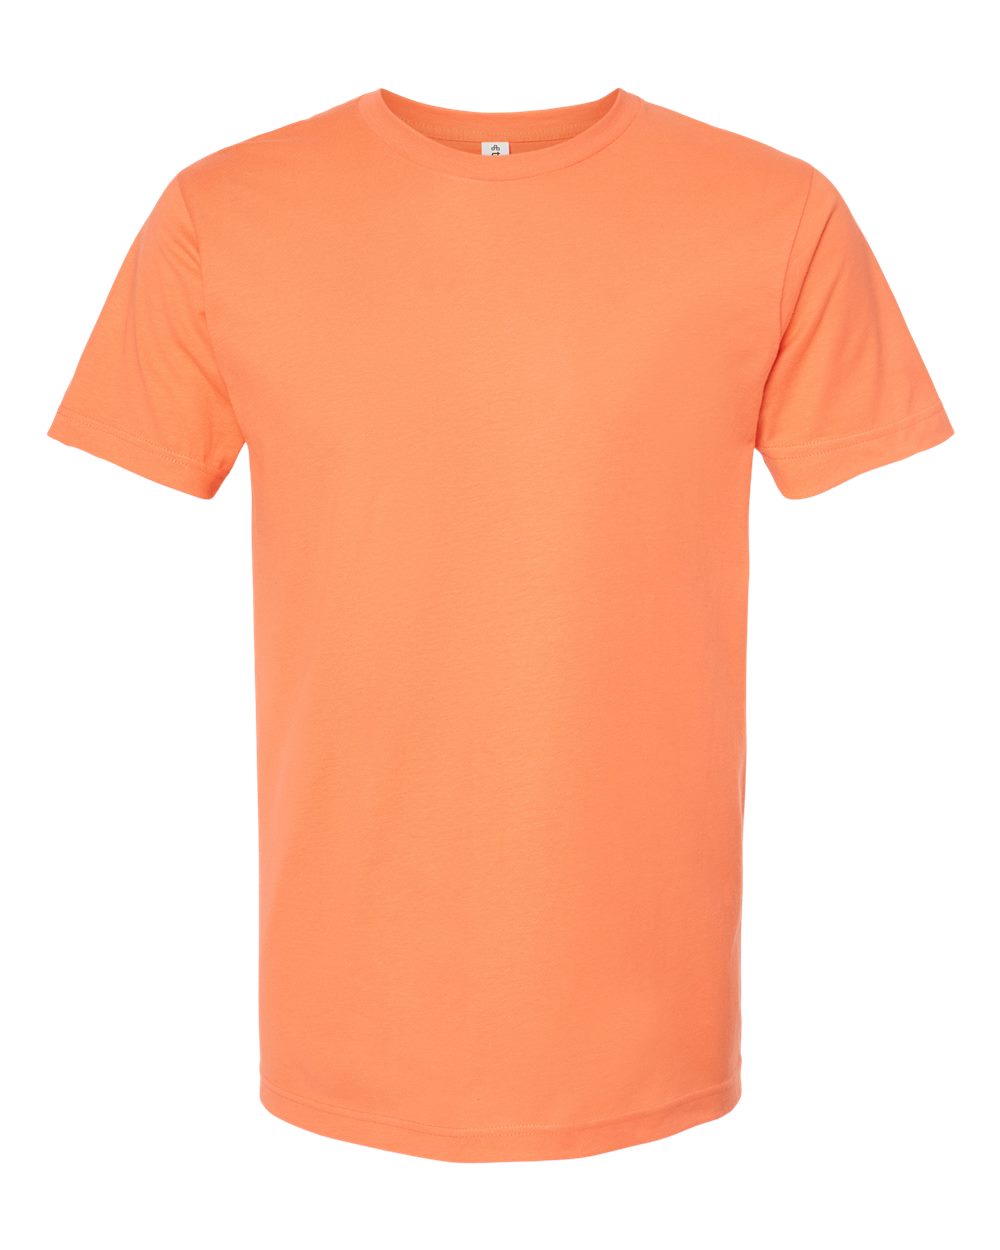 Tultex Unisex Tee (202) in Coral